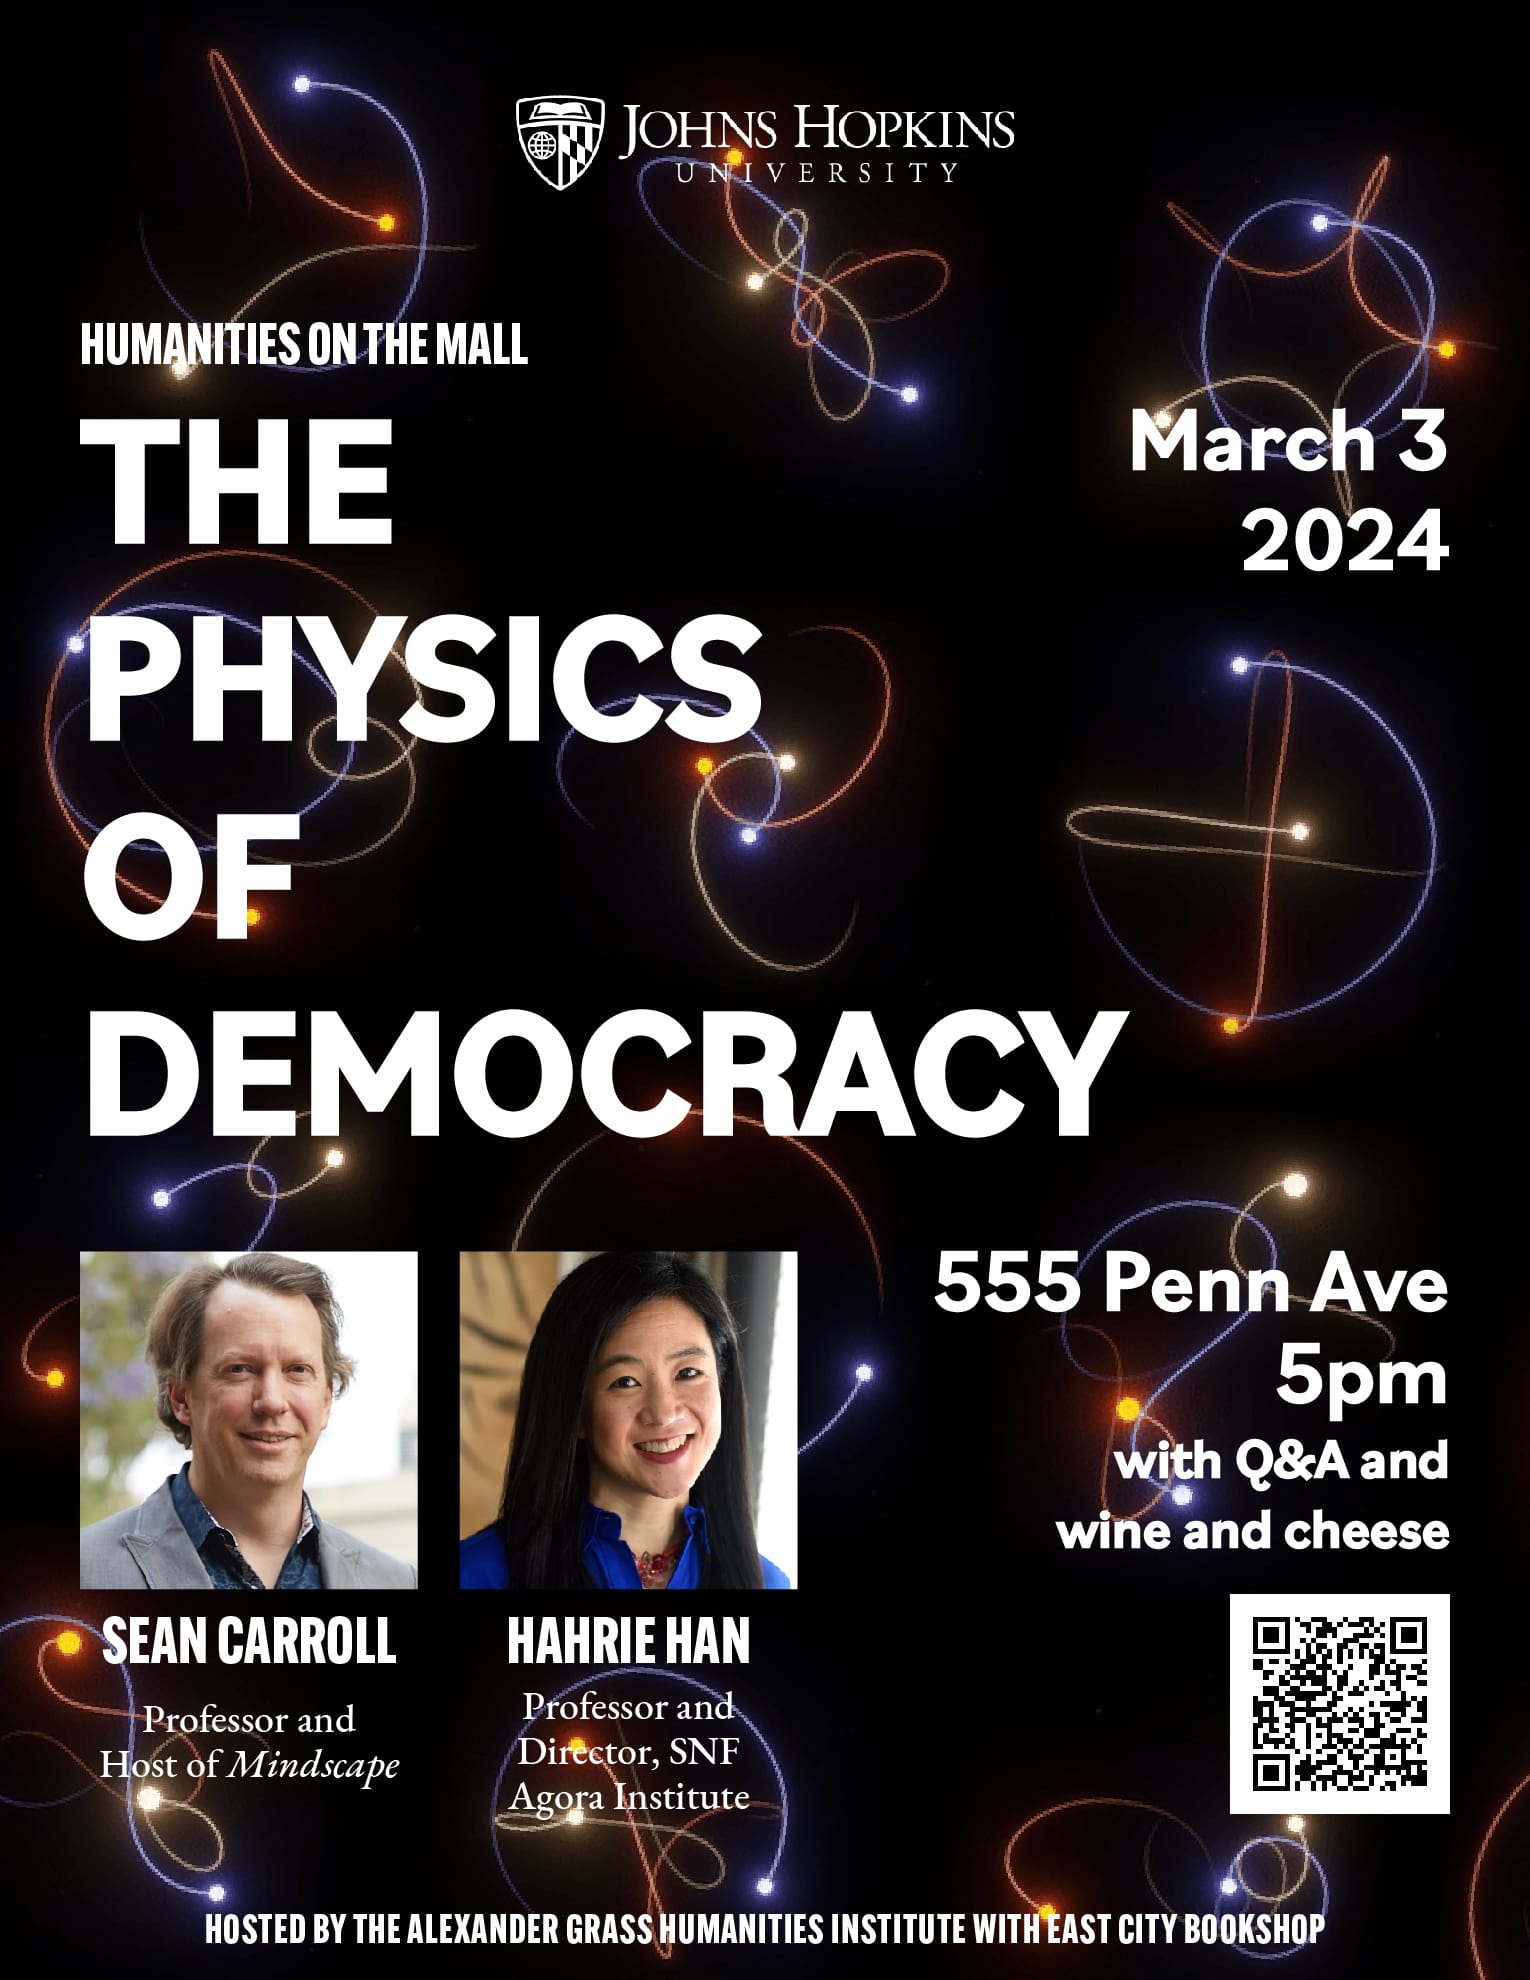 Poster with new dates for Sean Carroll and Hahrie Han for Humanities on the Mall.